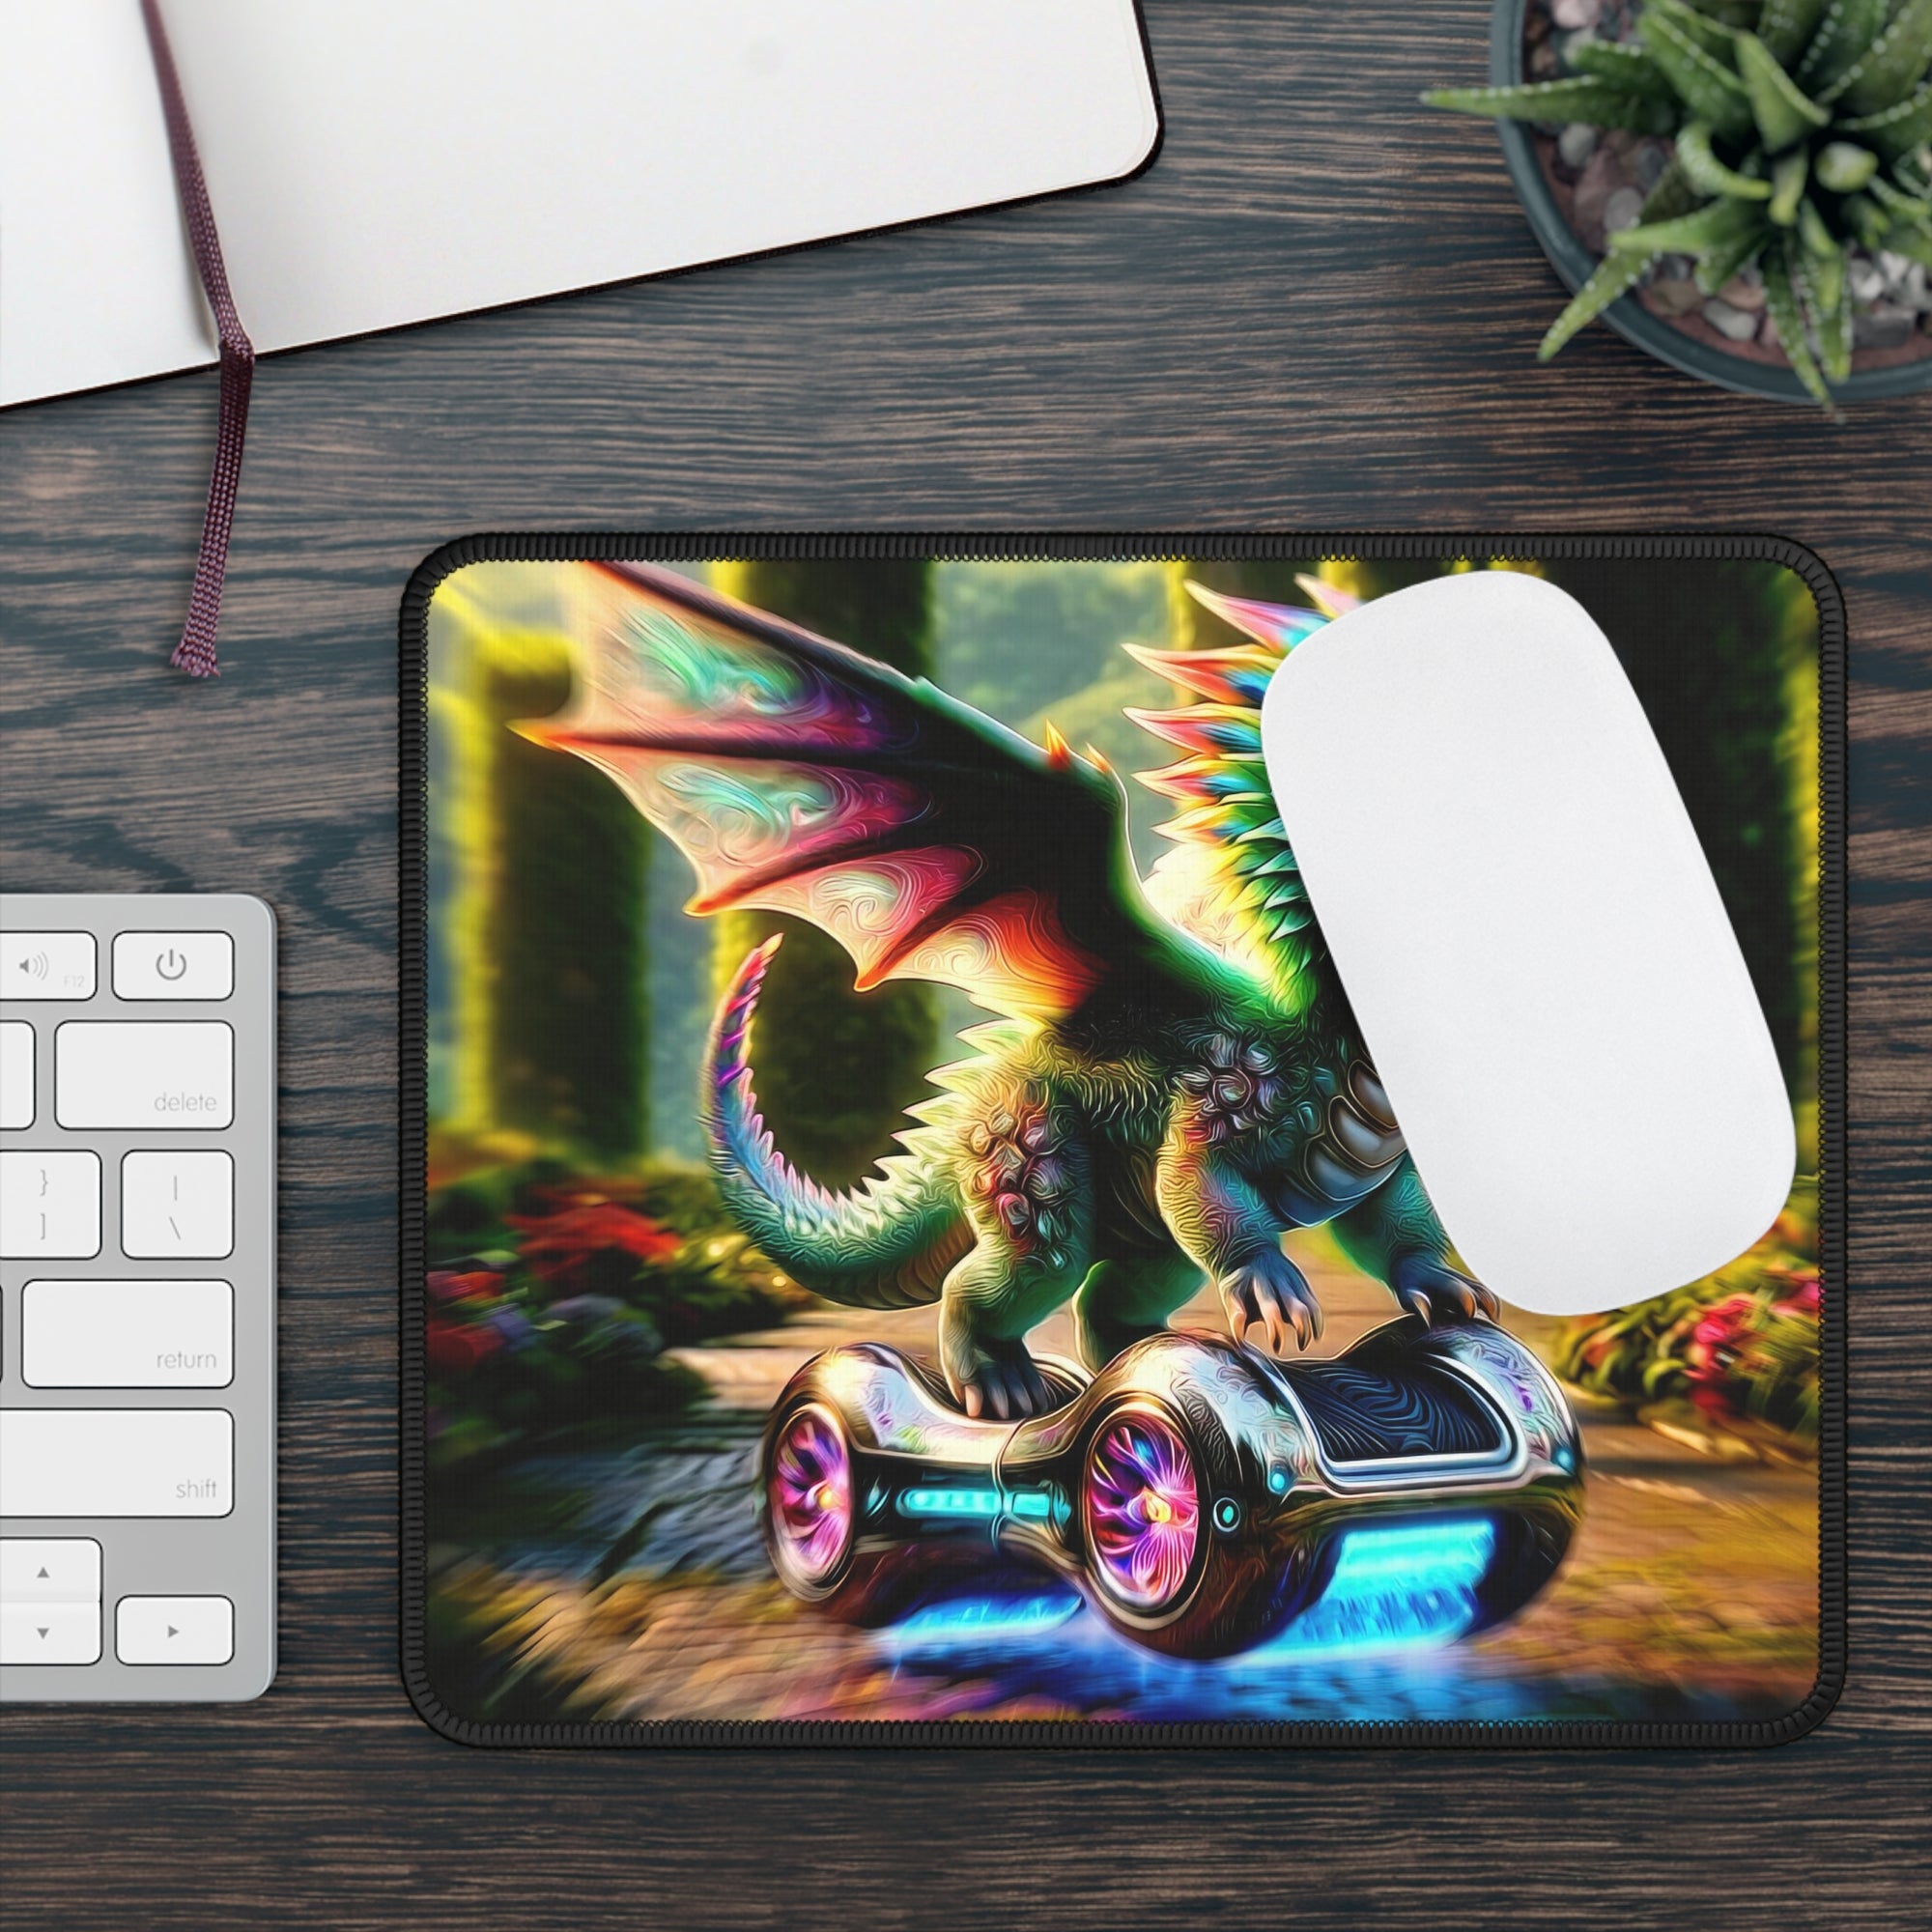 Enchanted Glide Gaming Mouse Pad